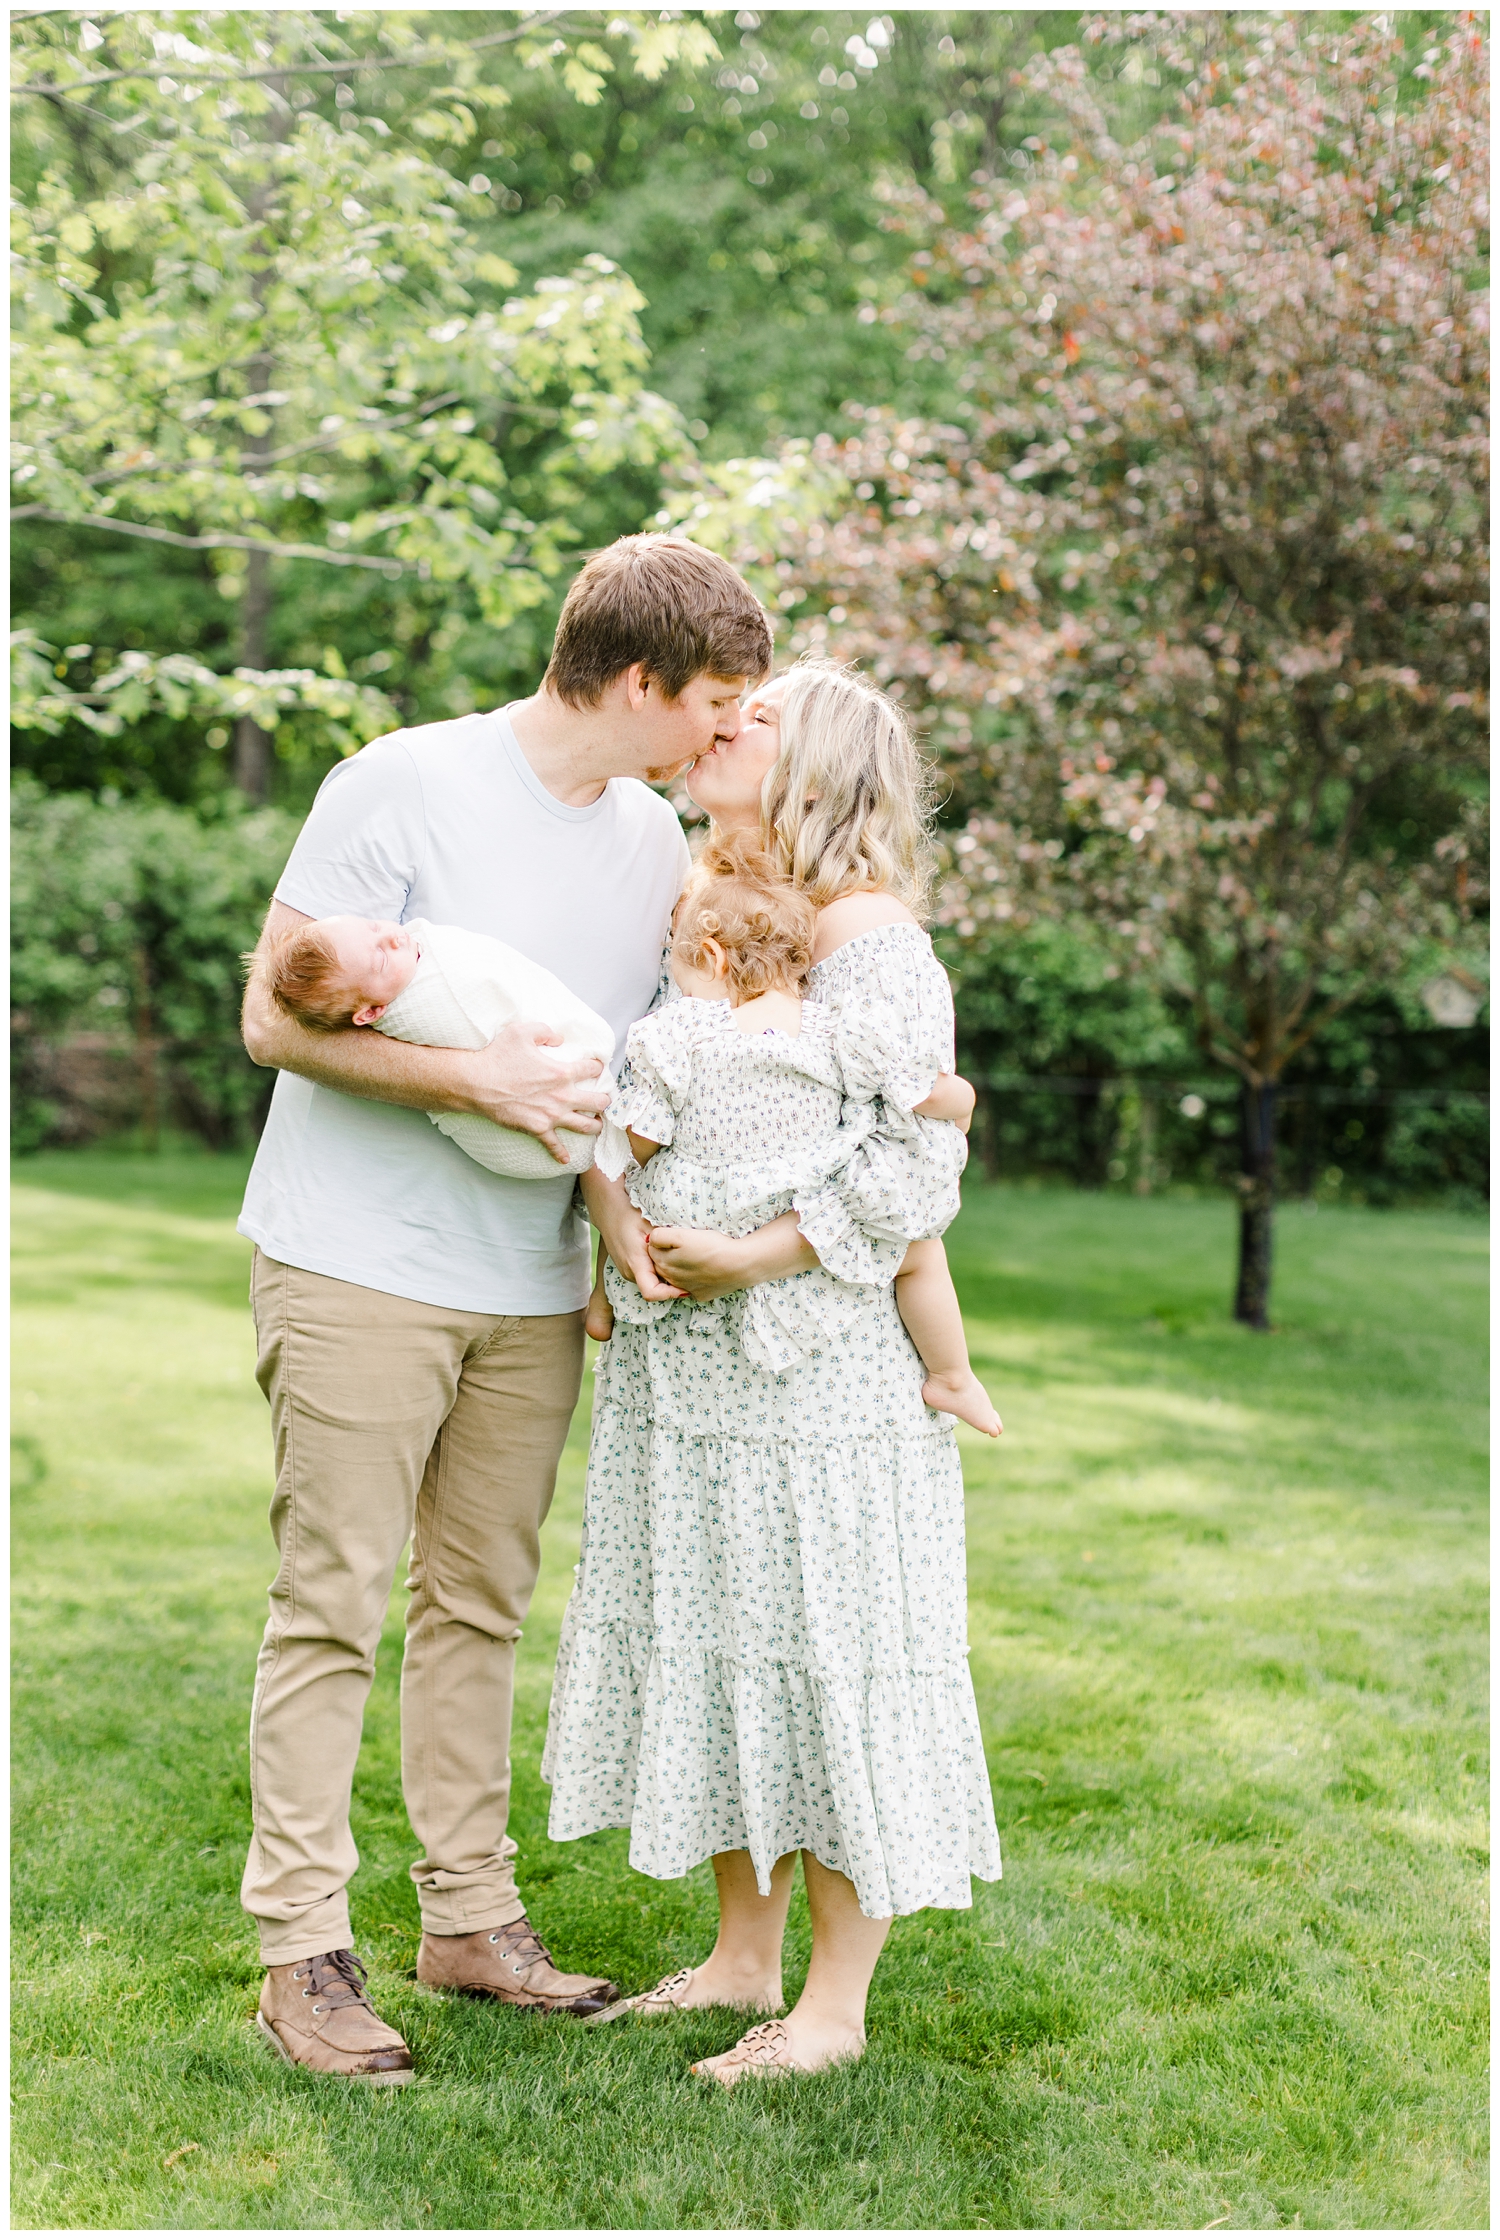 Abby and Derek share a kiss in the soft morning light while holding their small children | CB Studio